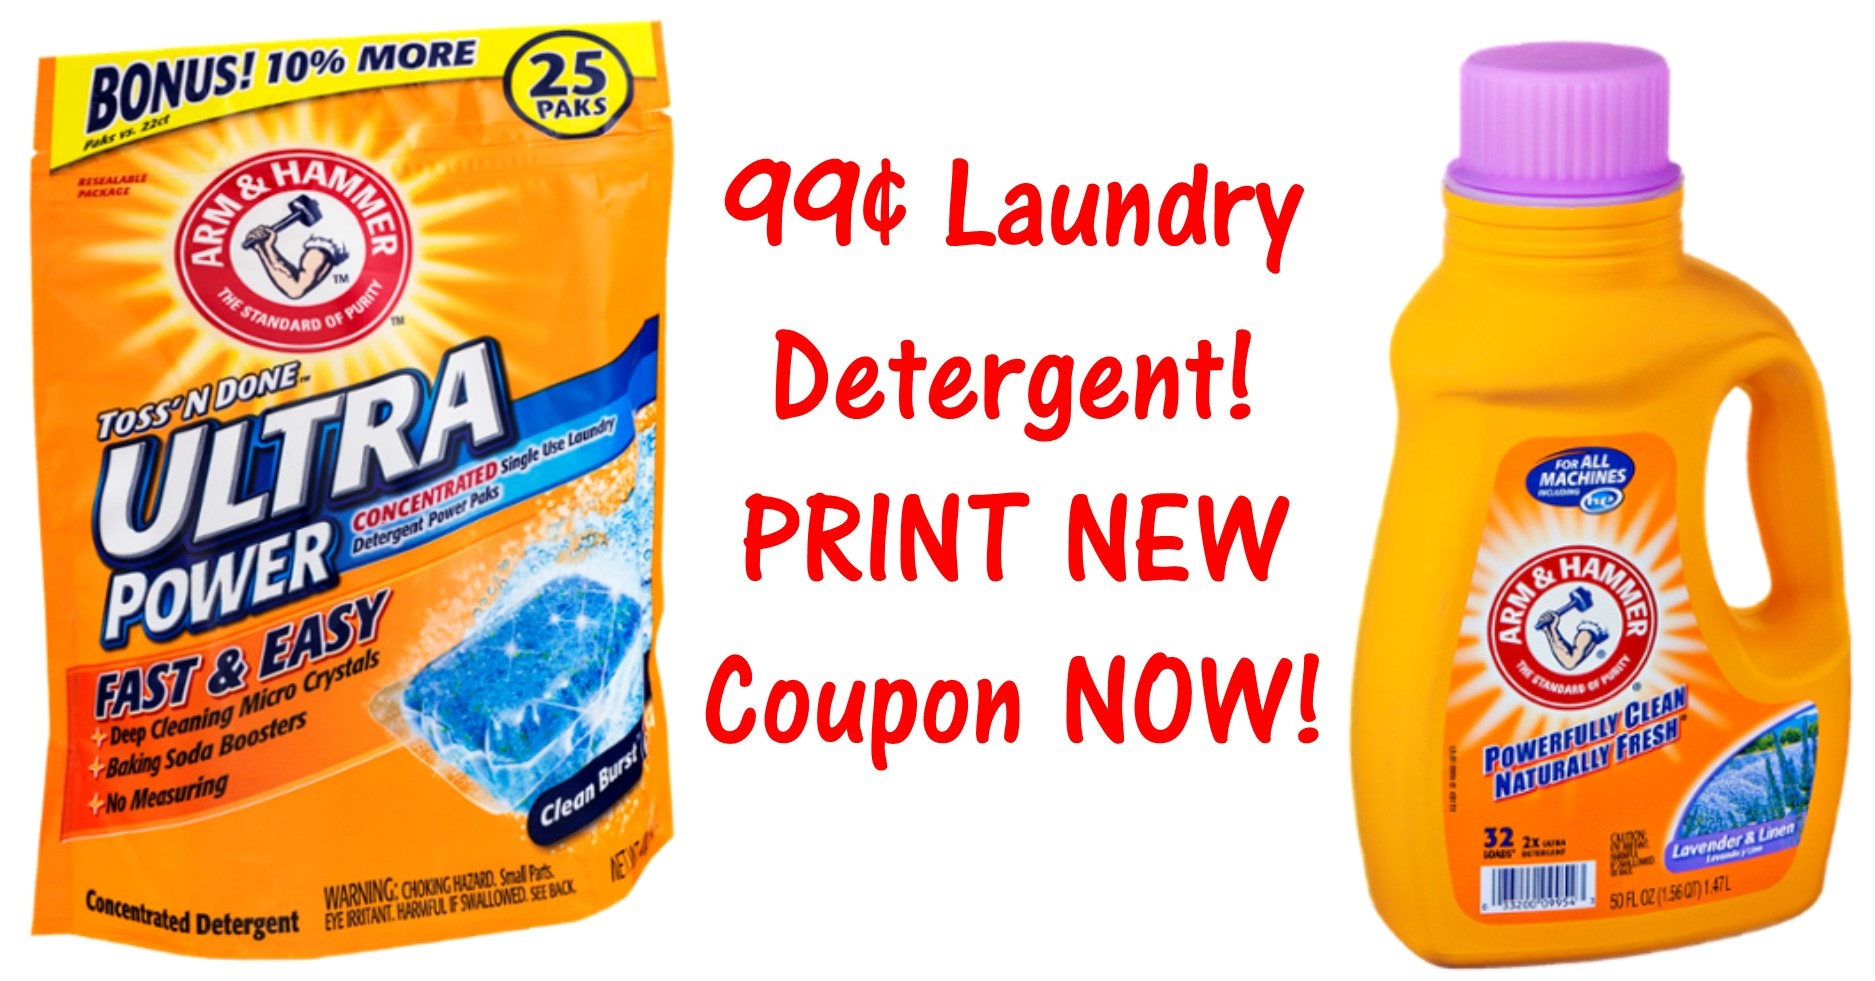 New Arm &amp; Hammer Printable Coupons = $0.99 Laundry Detergent! - Free Printable Arm And Hammer Laundry Detergent Coupons